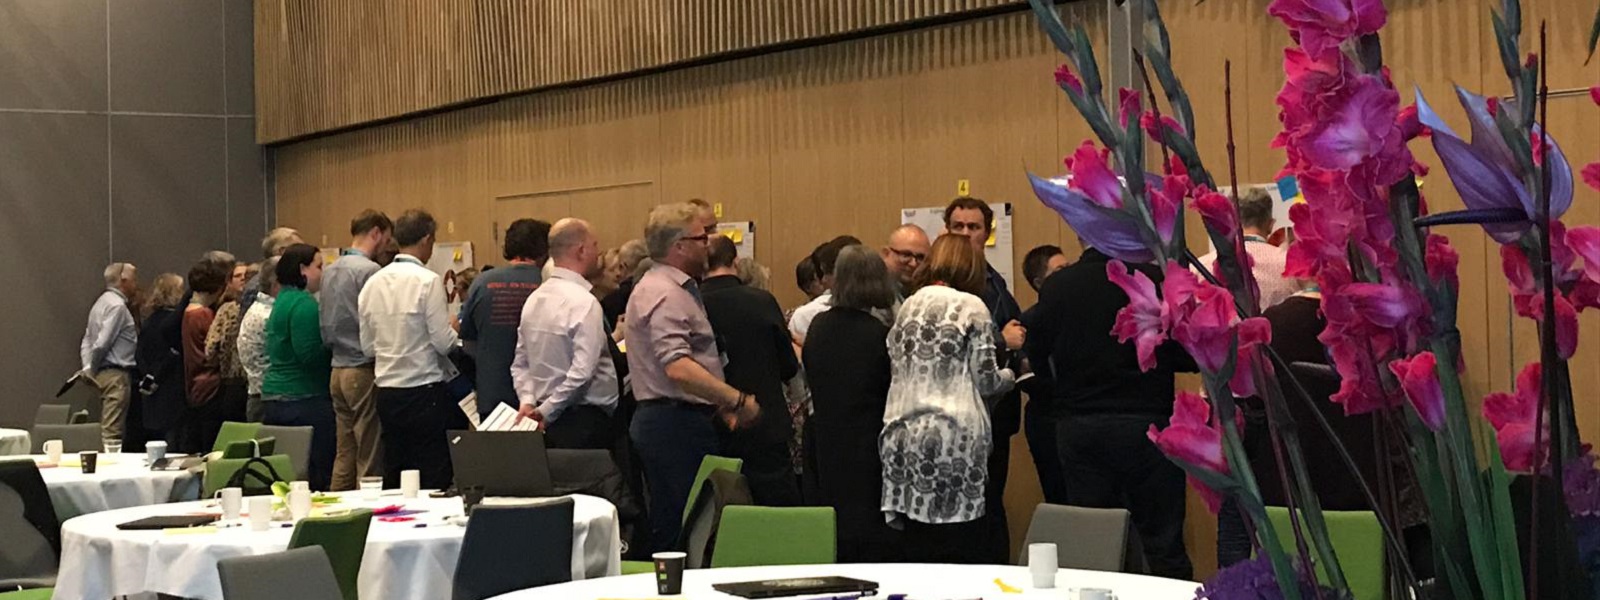 People participating in a group activity at a conference